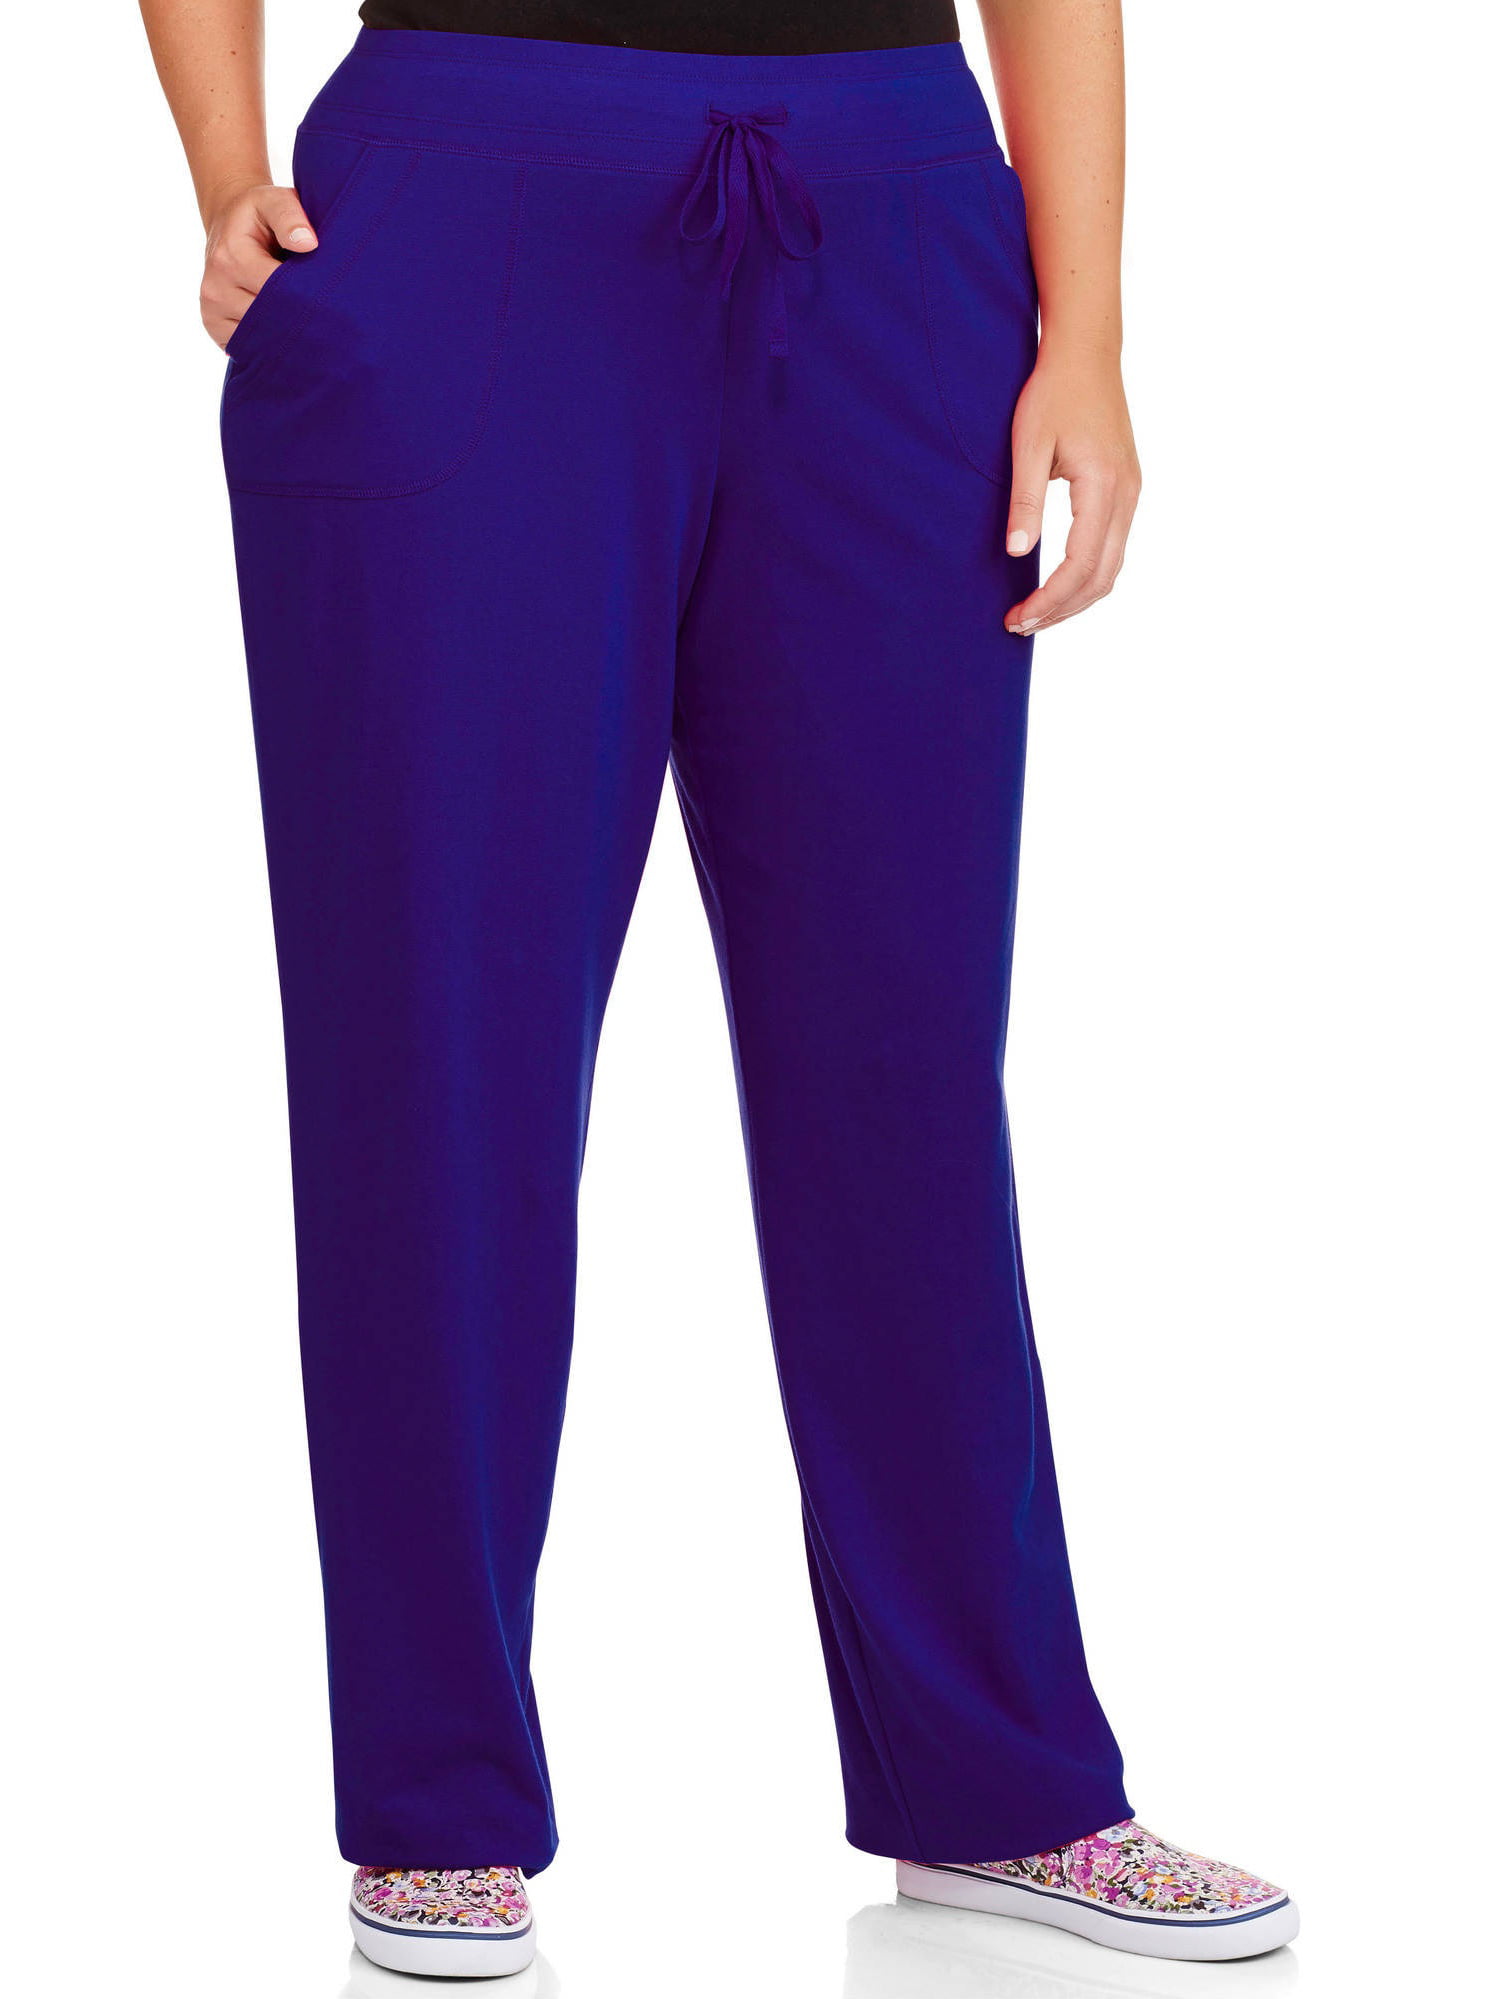 Danskin Now Women's Plus-Size Relaxed Pants with Drawstring - Walmart.com